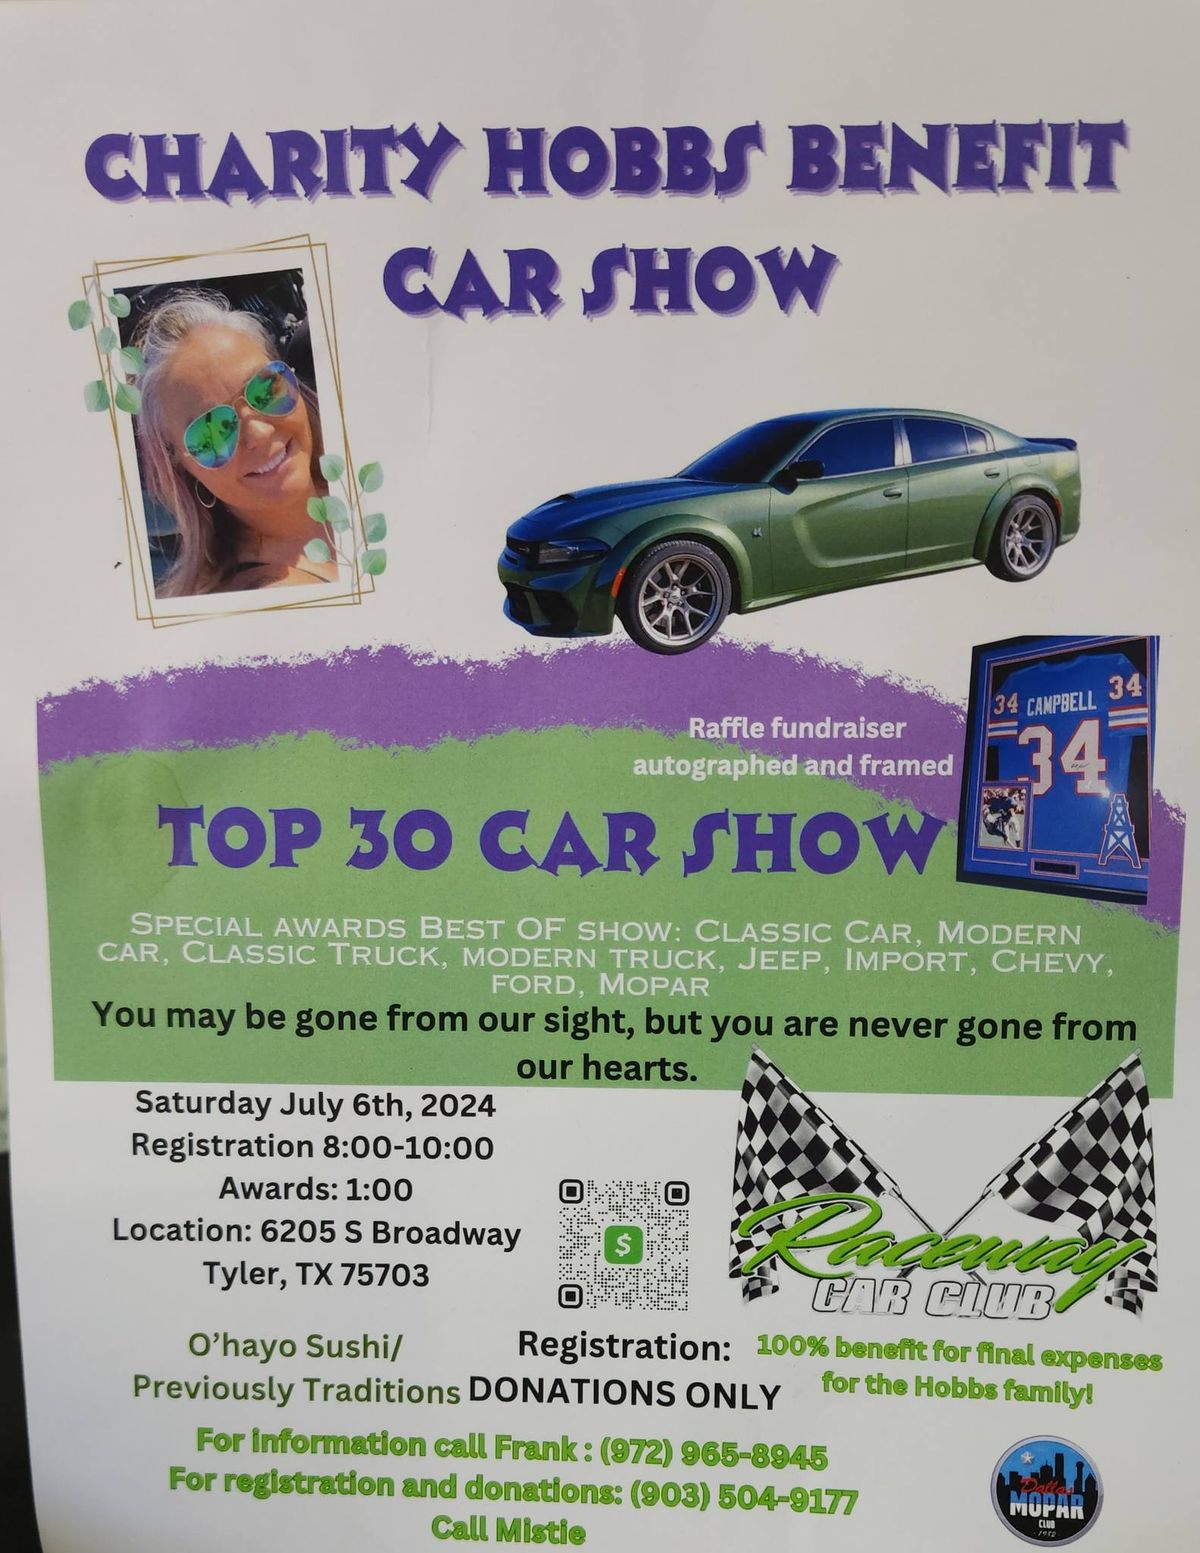 Benefit Car Show for Chris and Charity Hobbs